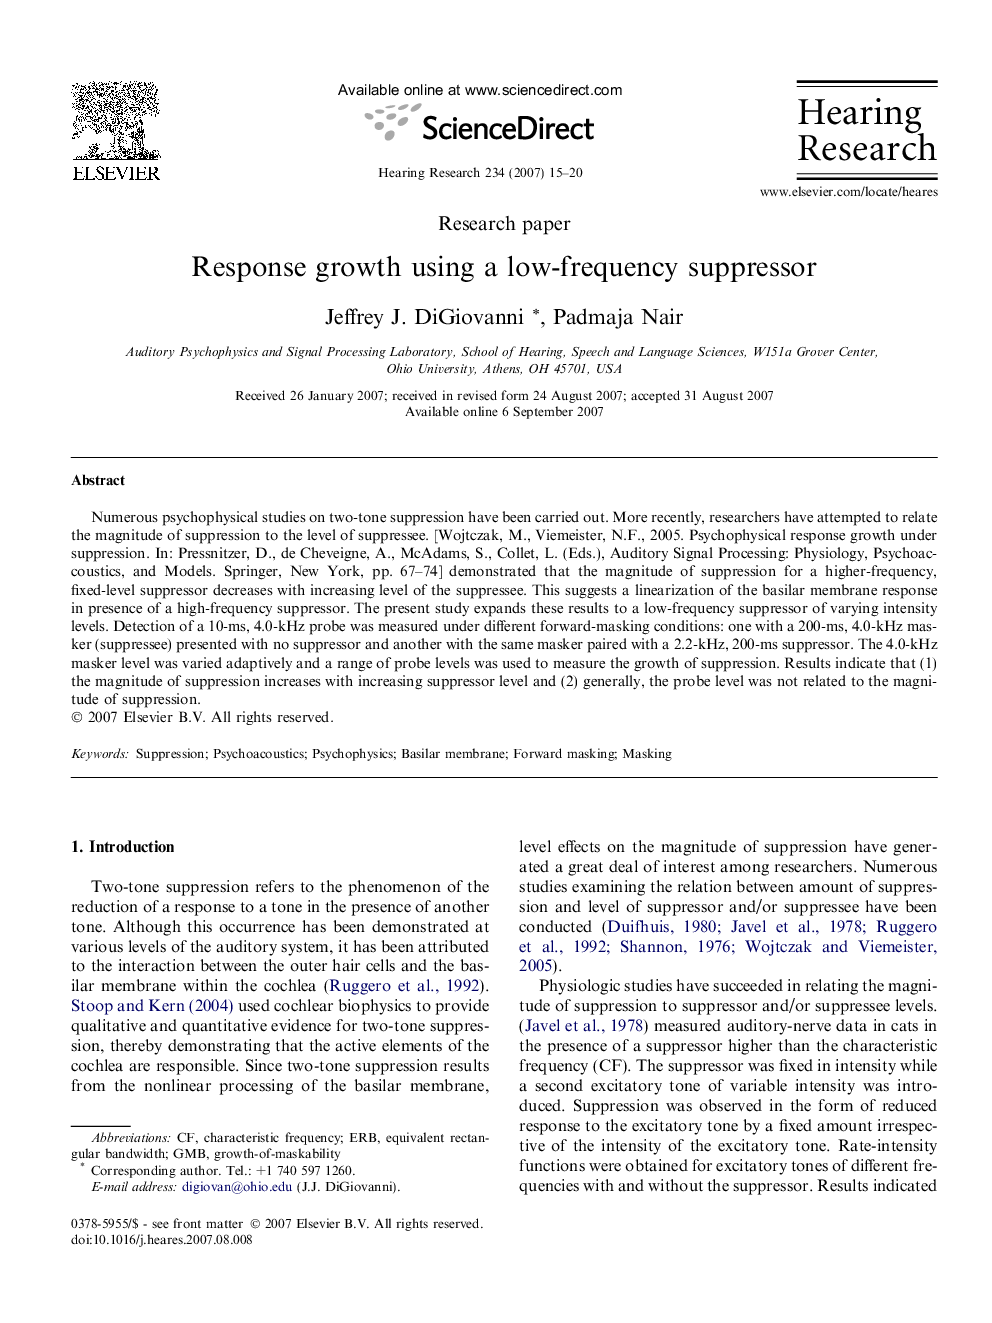 Response growth using a low-frequency suppressor